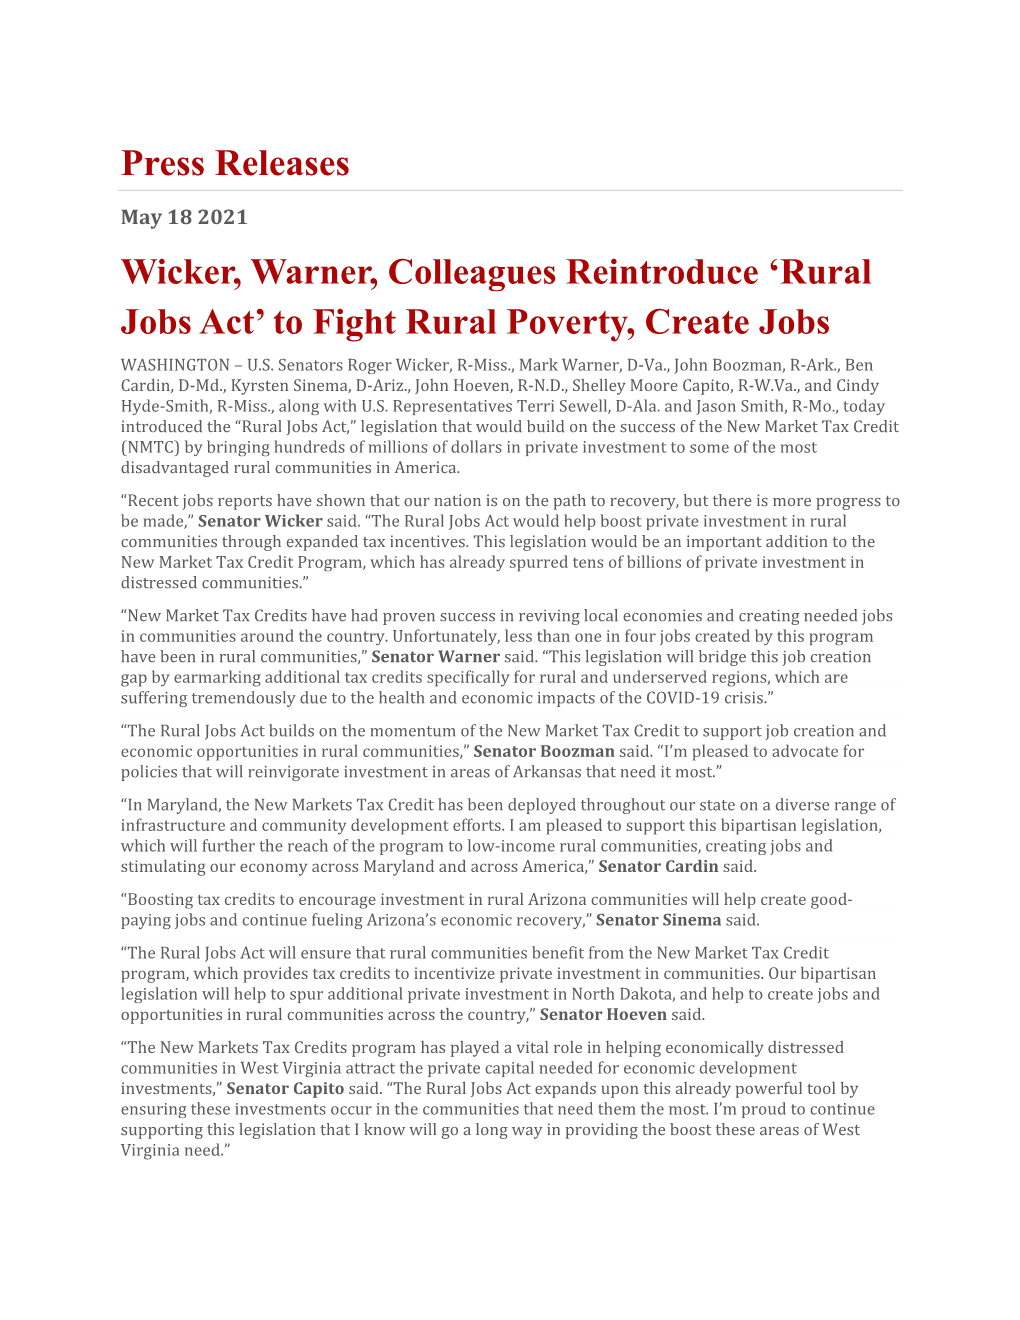 Press Release: Wicker, Warner, Colleagues Reintroduce 'Rural Jobs Act' to Fight Rural Poverty, Create Jobs